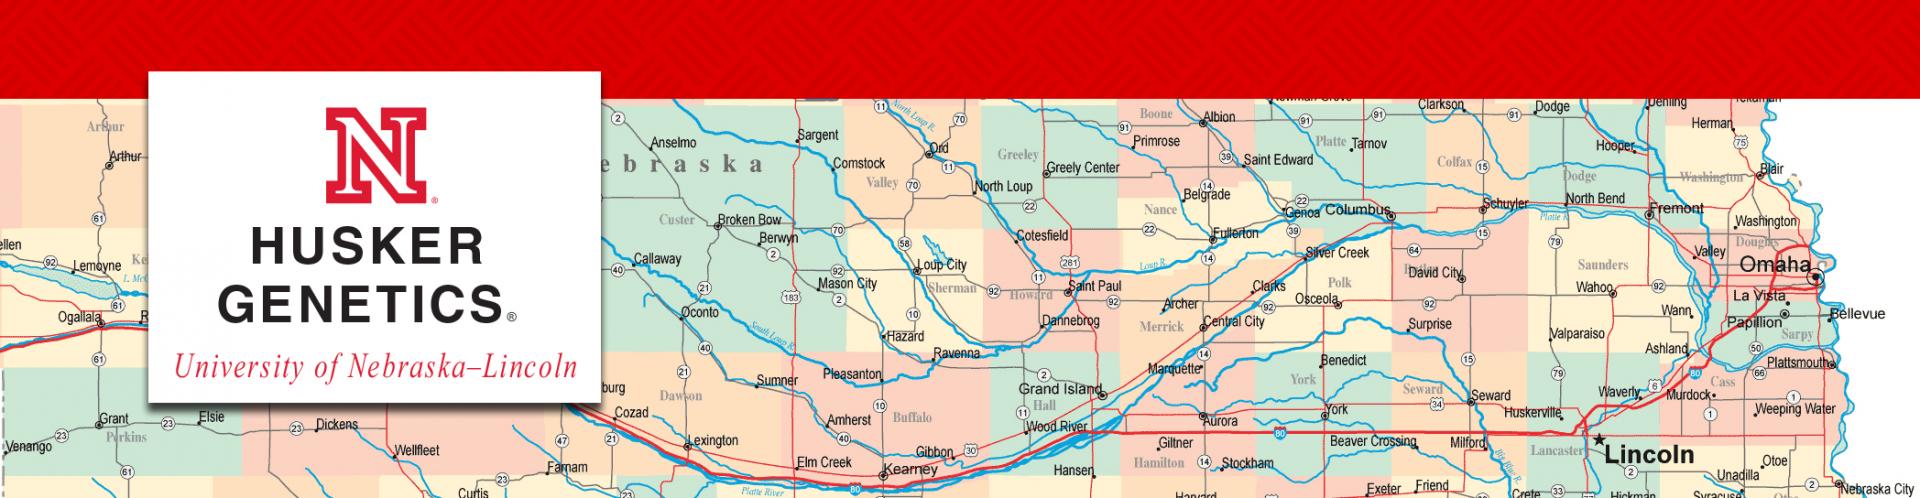 Husker Genetics Map and Directions